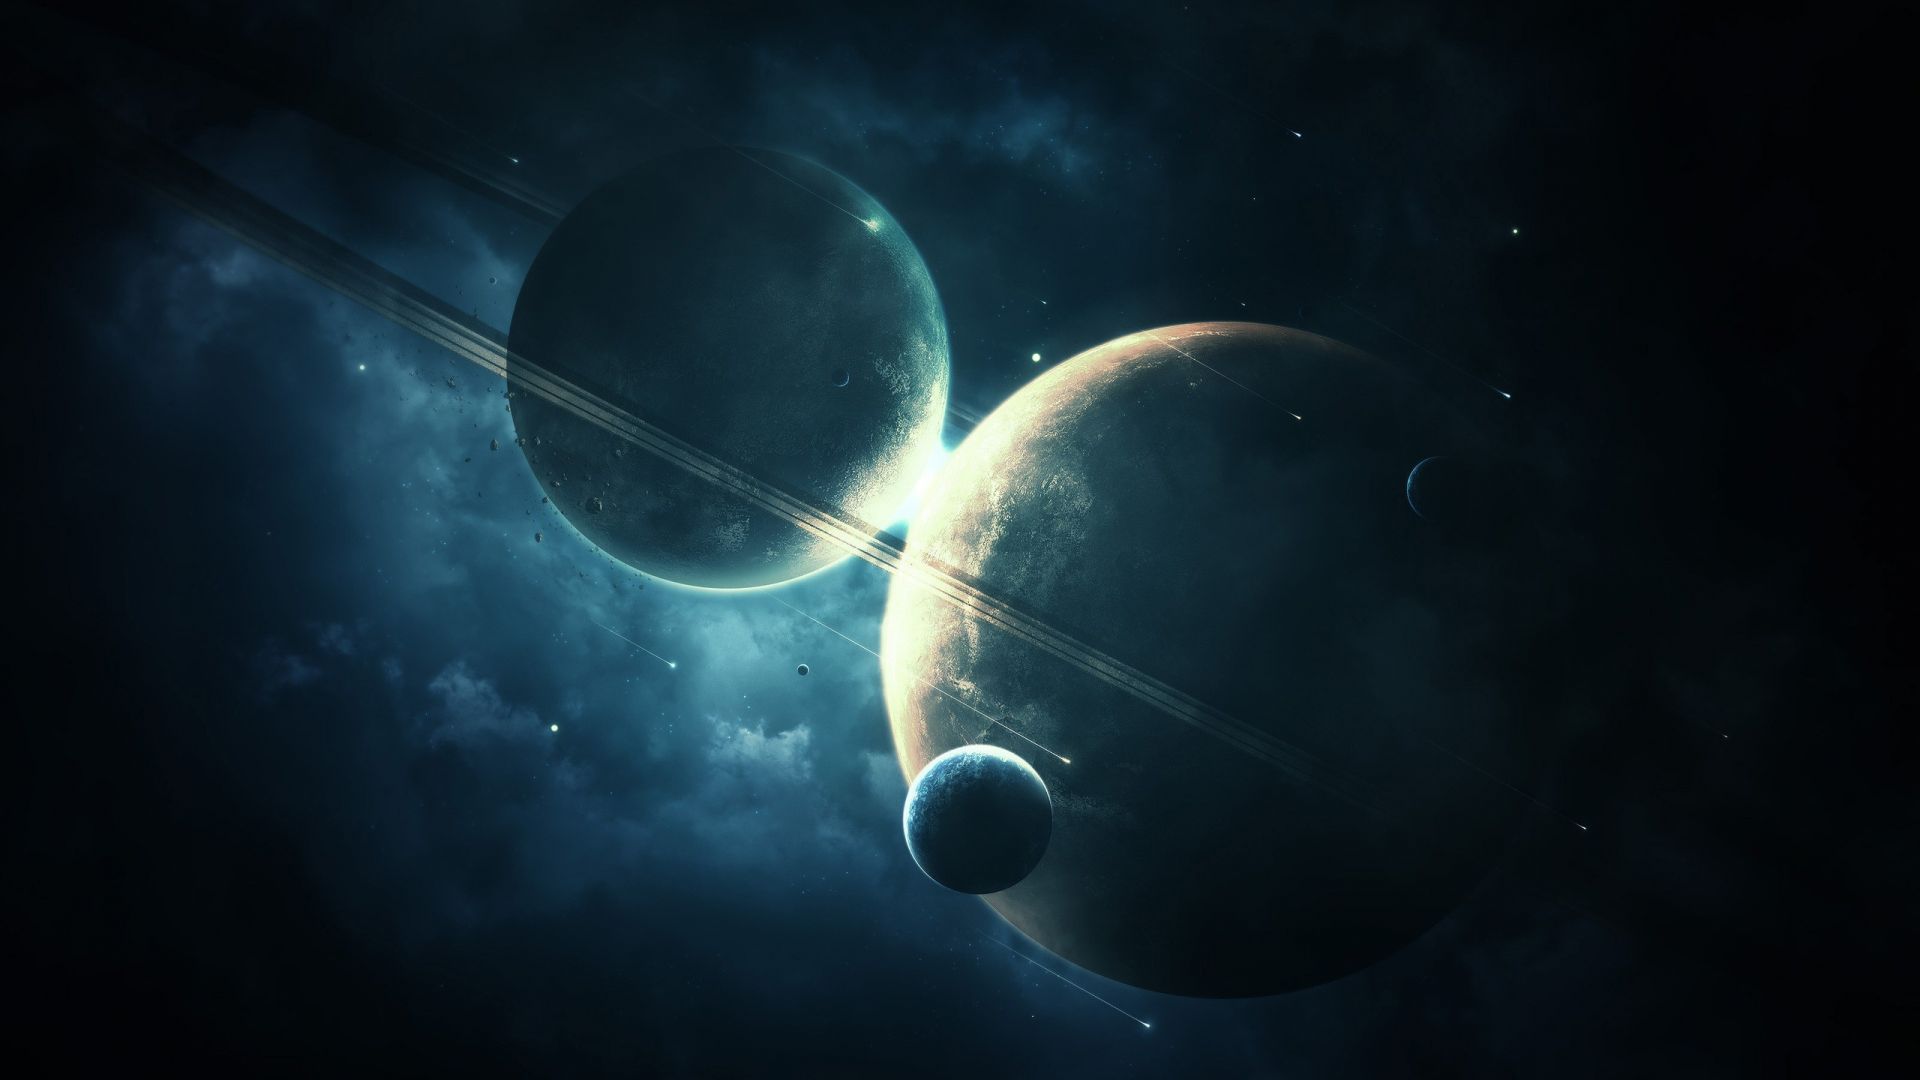 Wallpaper Planets with moon